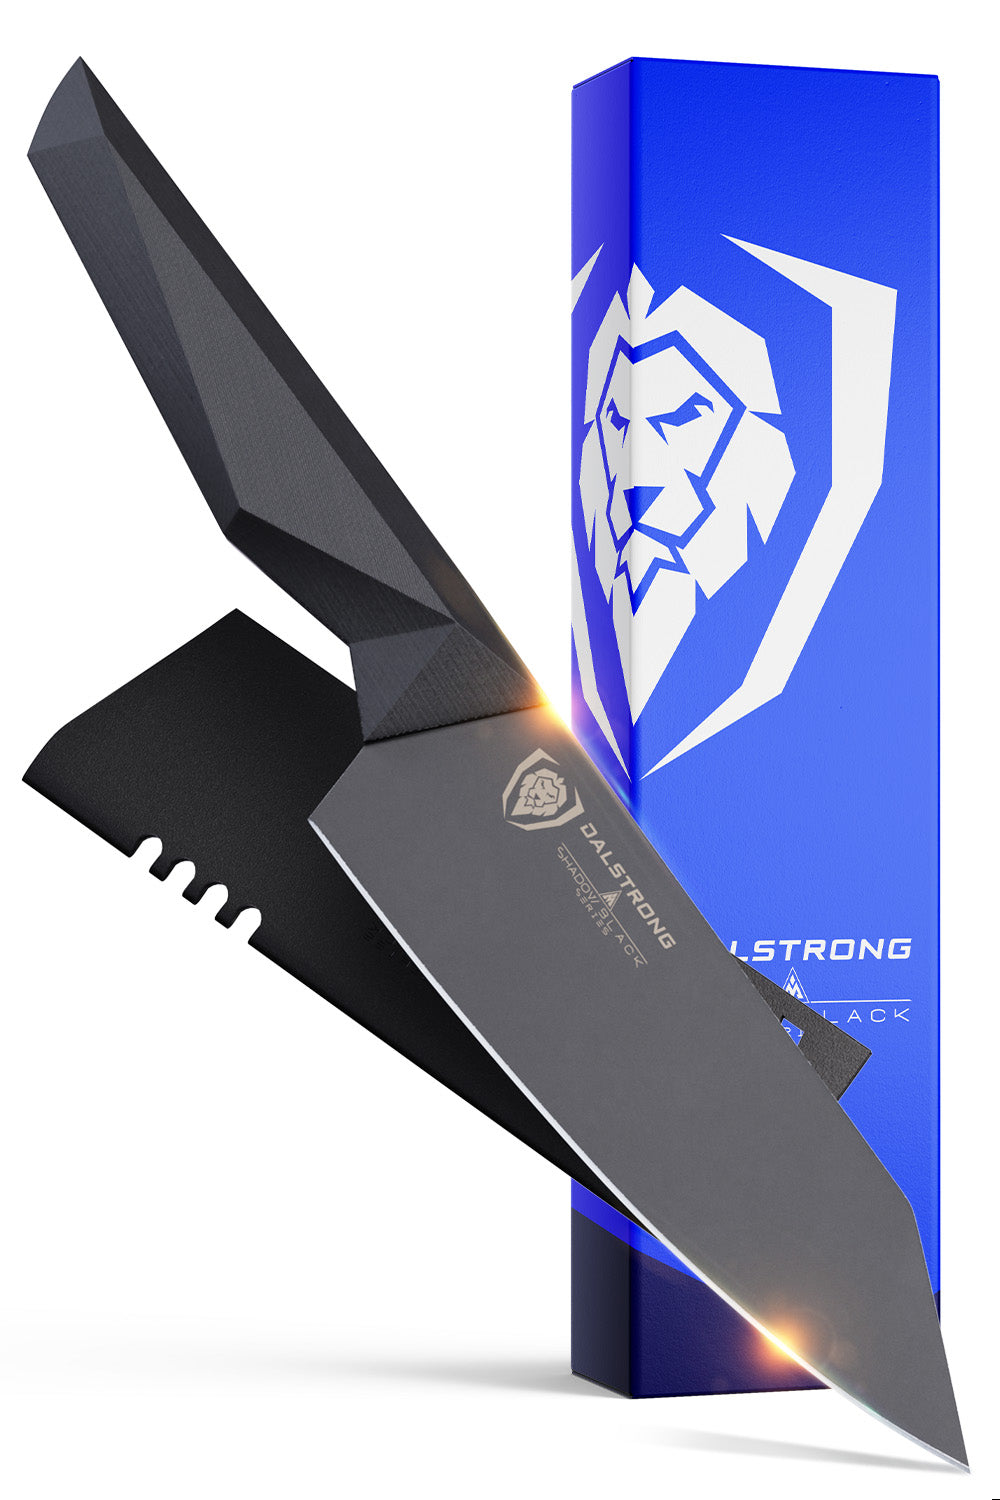 Chef's Knife 6" | Shadow Black Series | NSF Certified | Dalstrong ©